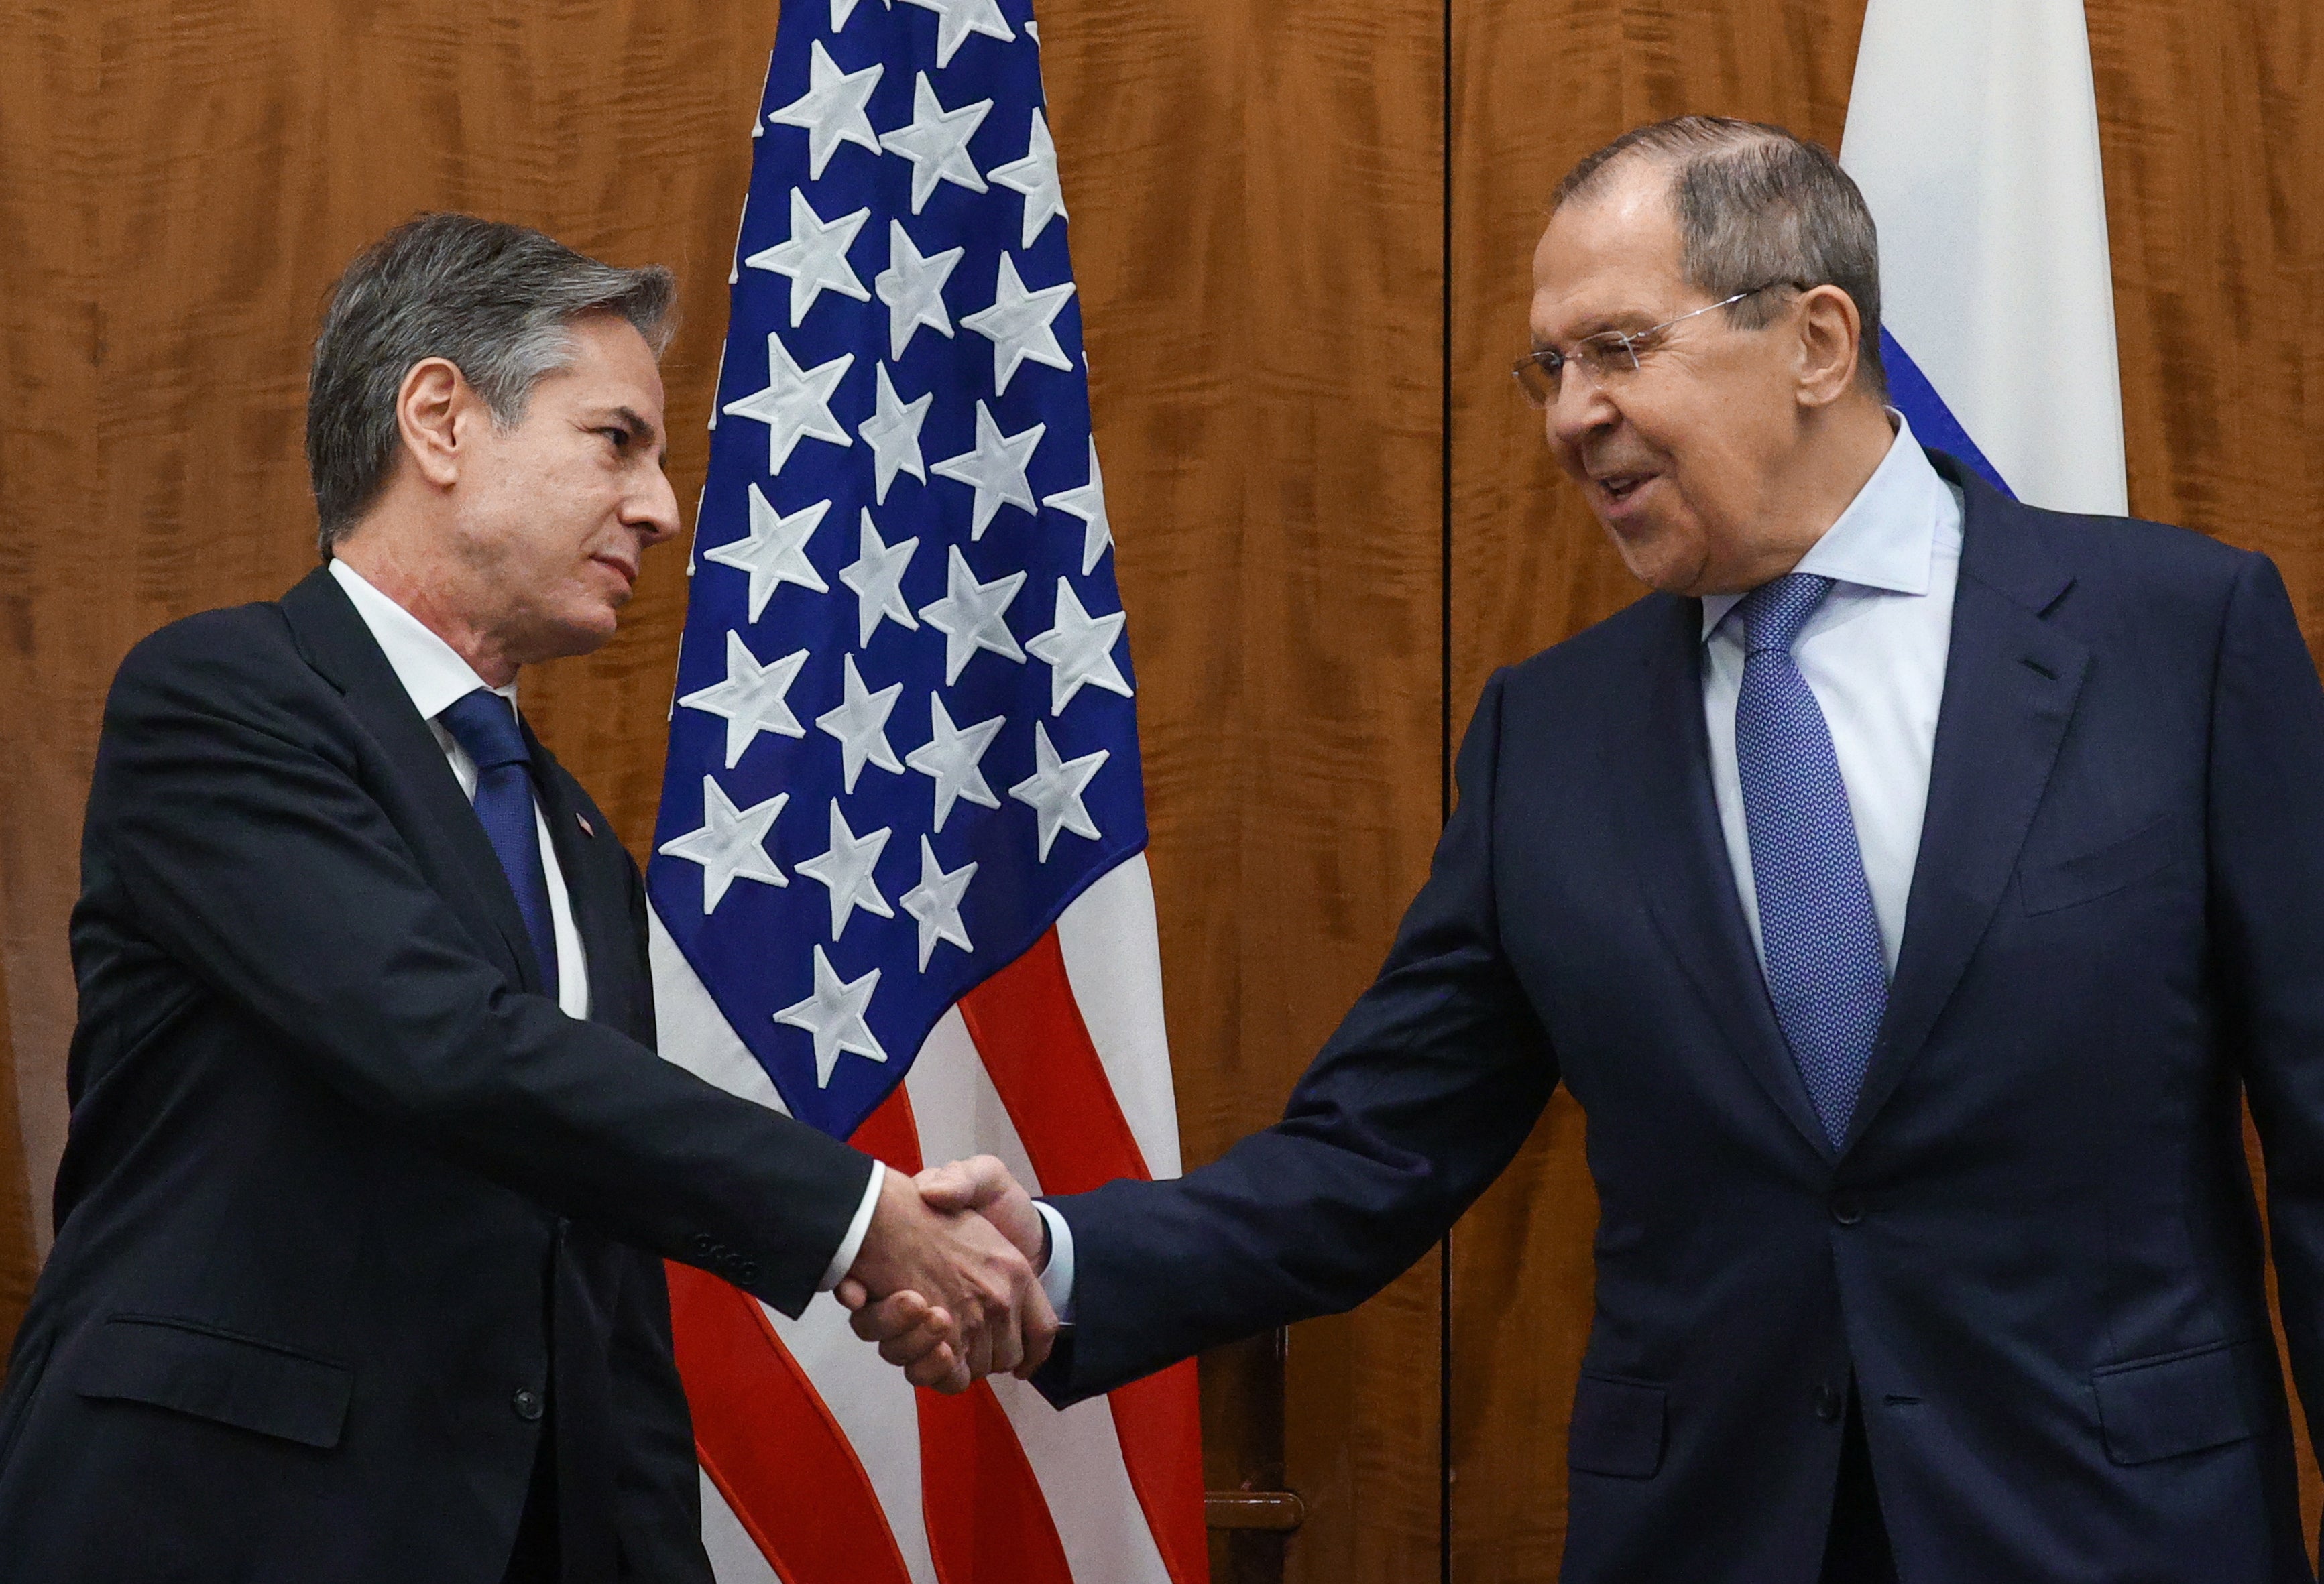 US Secretary of State Antony Blinken (L) and Russian Foreign Minister Sergei Lavrov